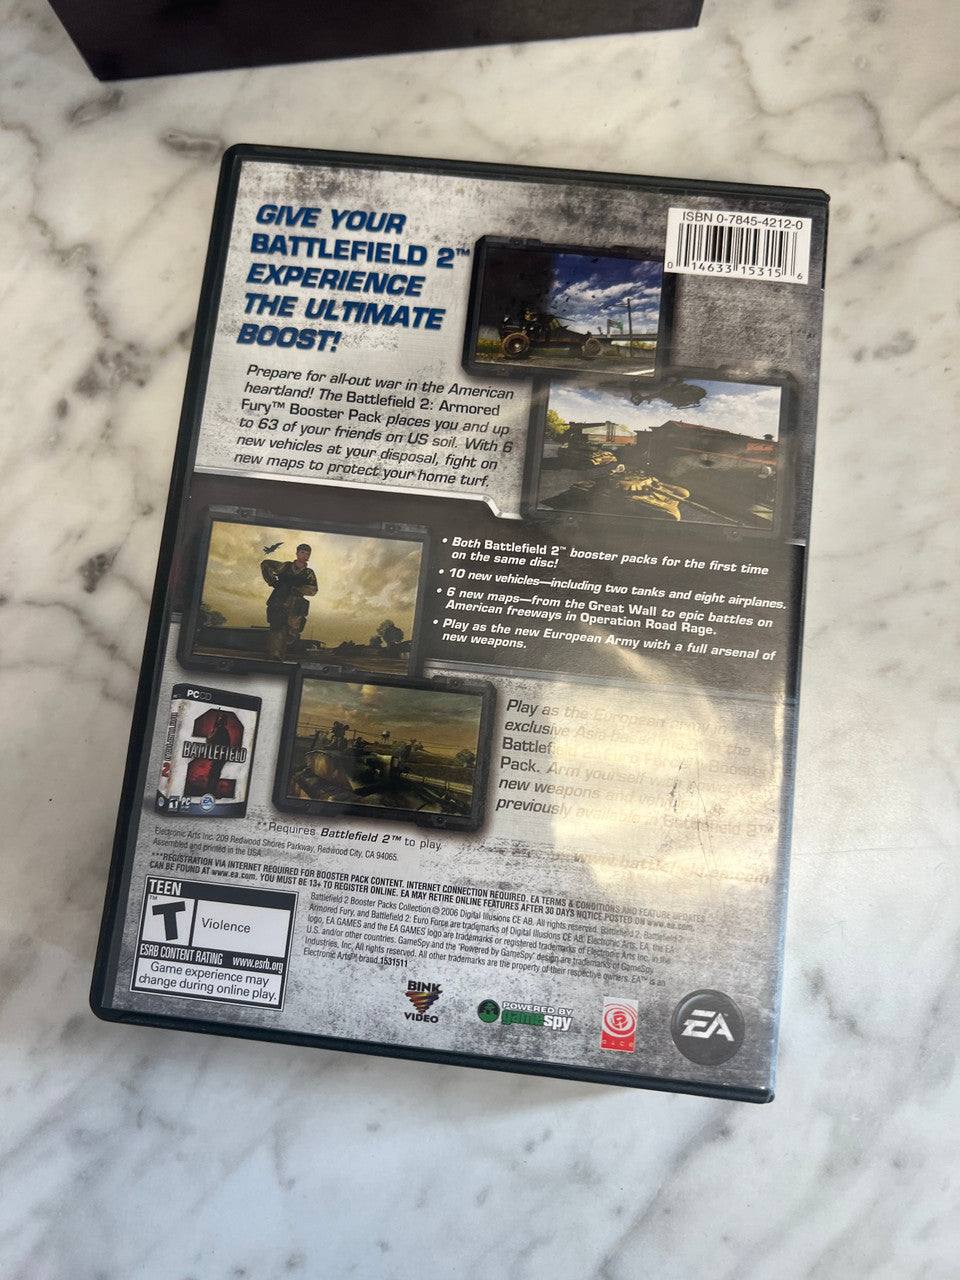 Battlefield 2 - Booster Packs Collection - (PC,2006) PC DVD Manual Included